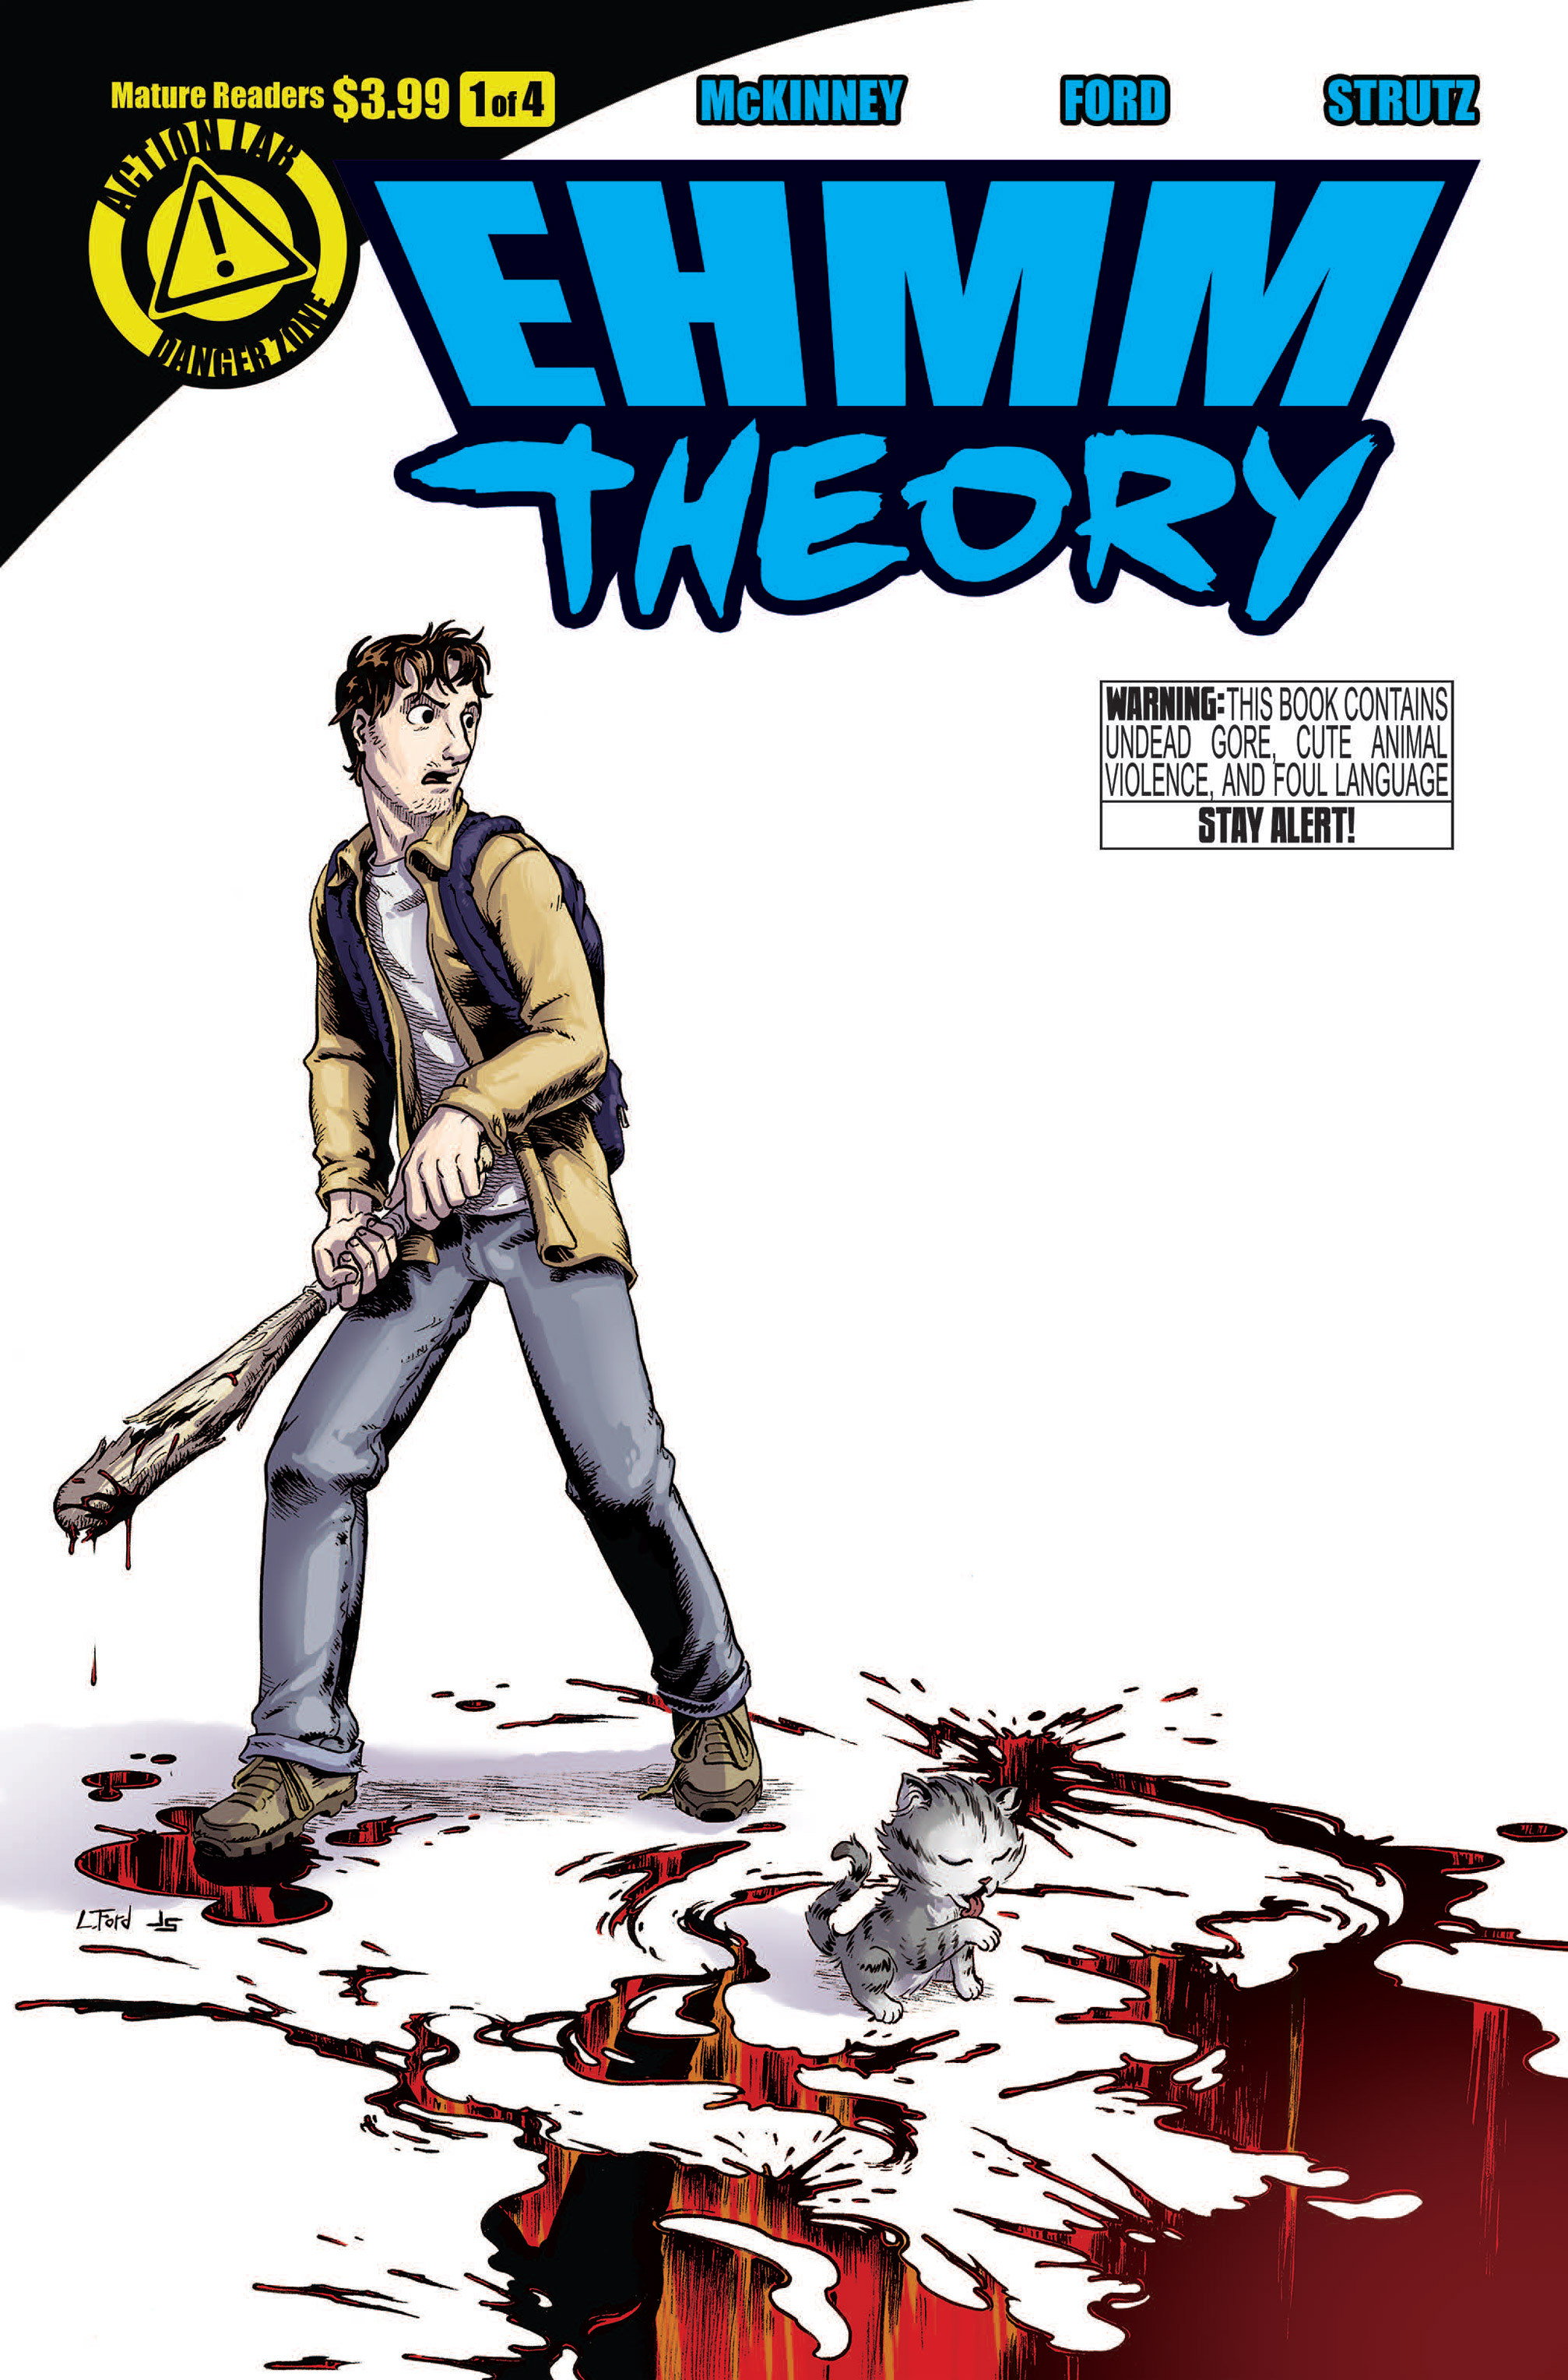 Read online Ehmm Theory comic -  Issue #1 - 1